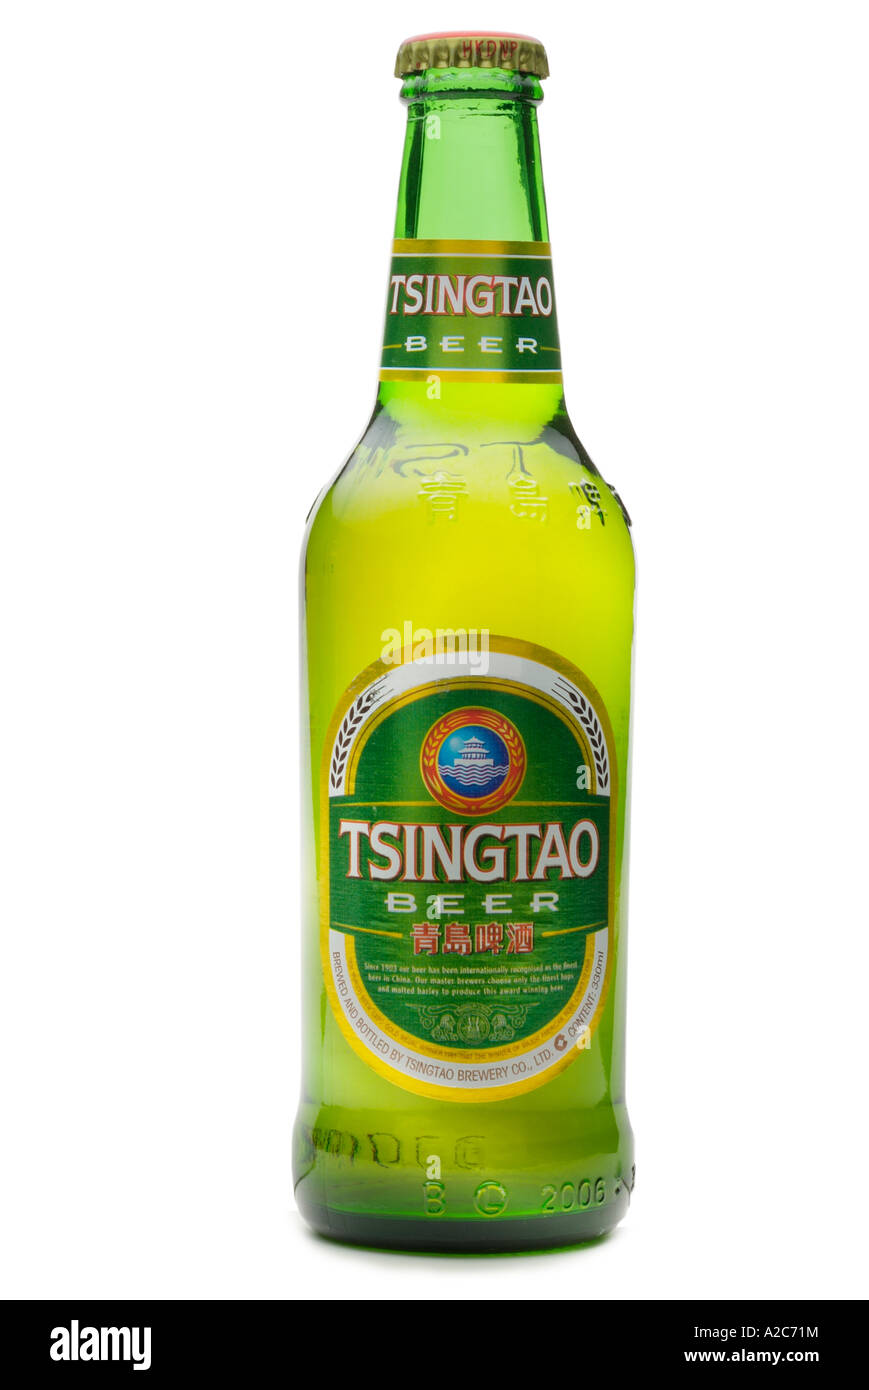 TSINGTAO BEER imported China Chinese orient oriental far east Asia crown top green glass bottle alcohol barley booze Beer Stock Photo